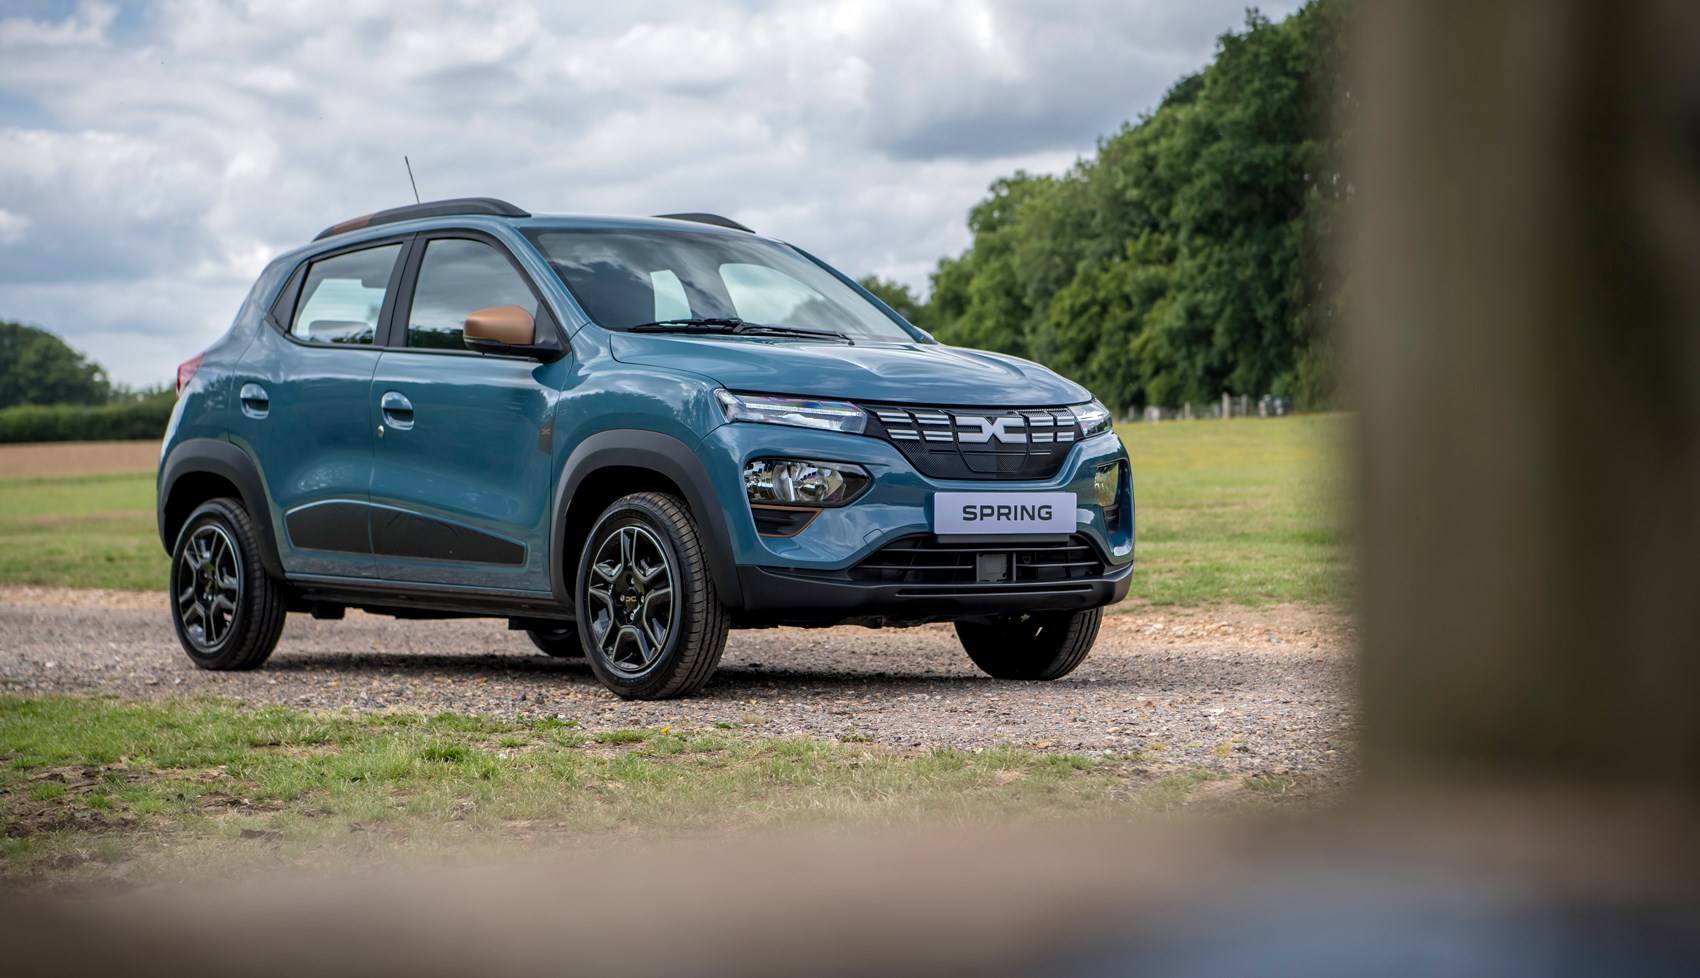 Dacia Spring video review: rewriting the EV rule book